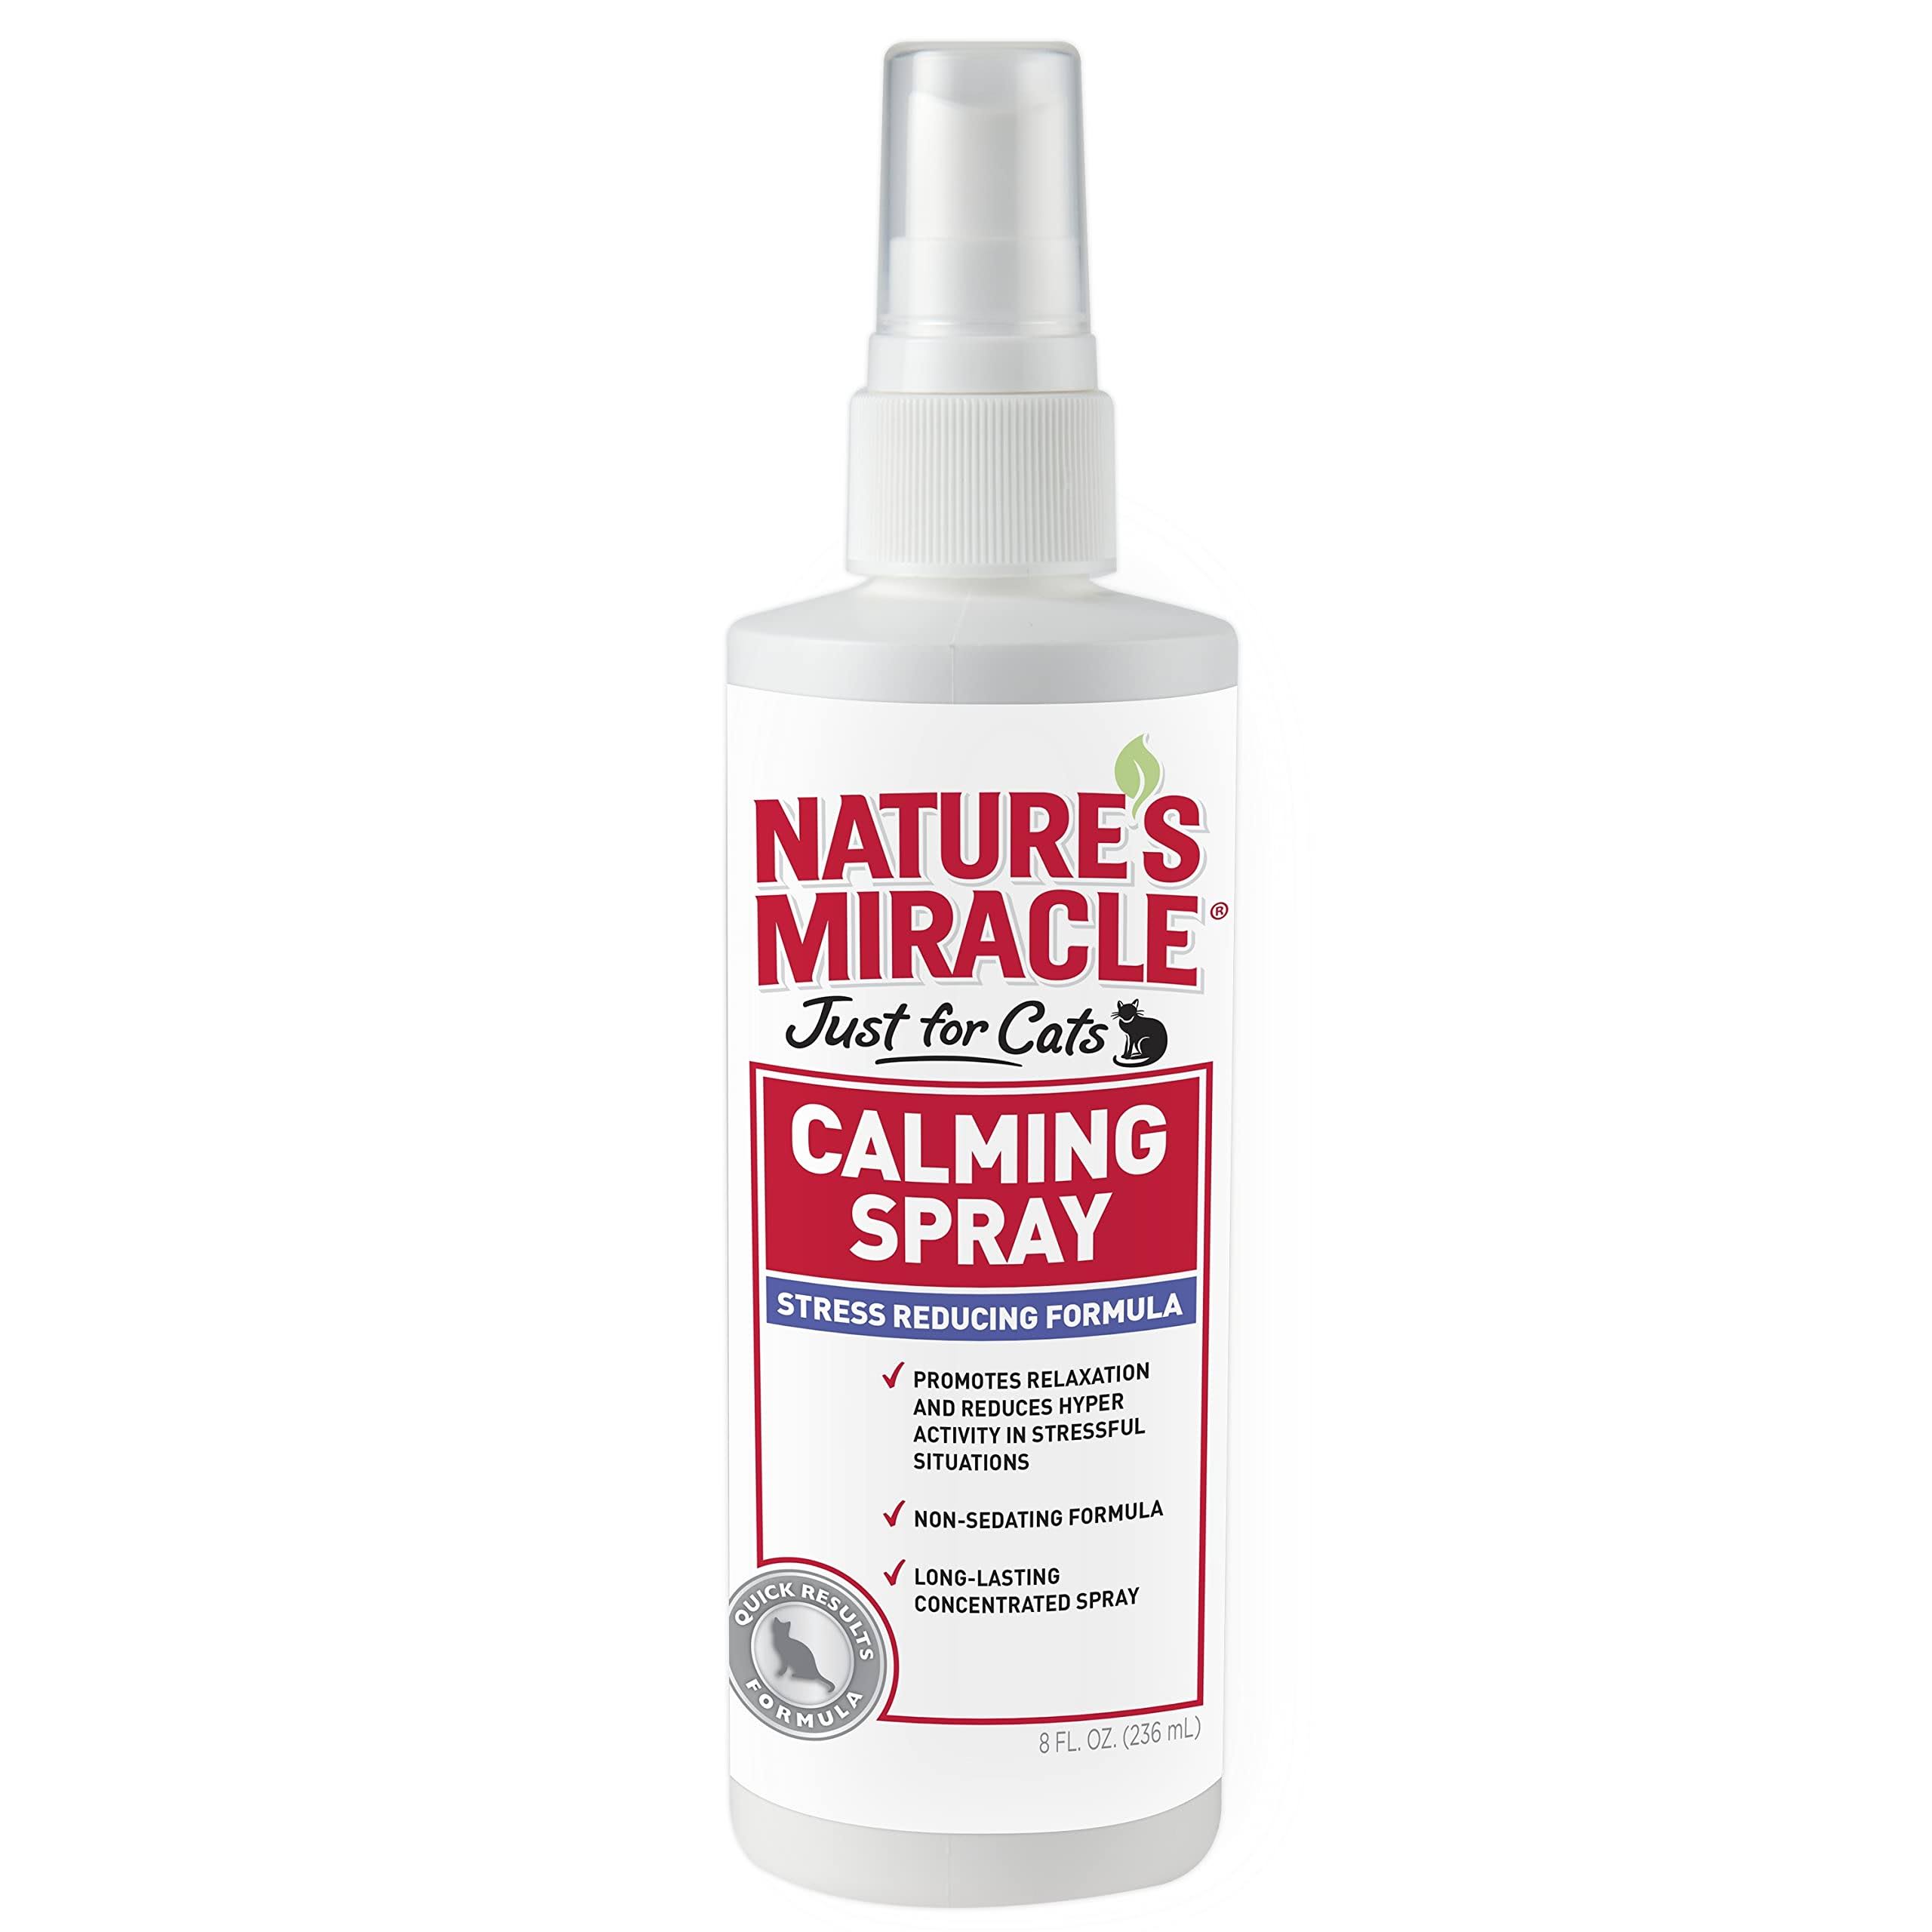 Nature's Miracle Just for Cats Calming Spray - 8 Oz